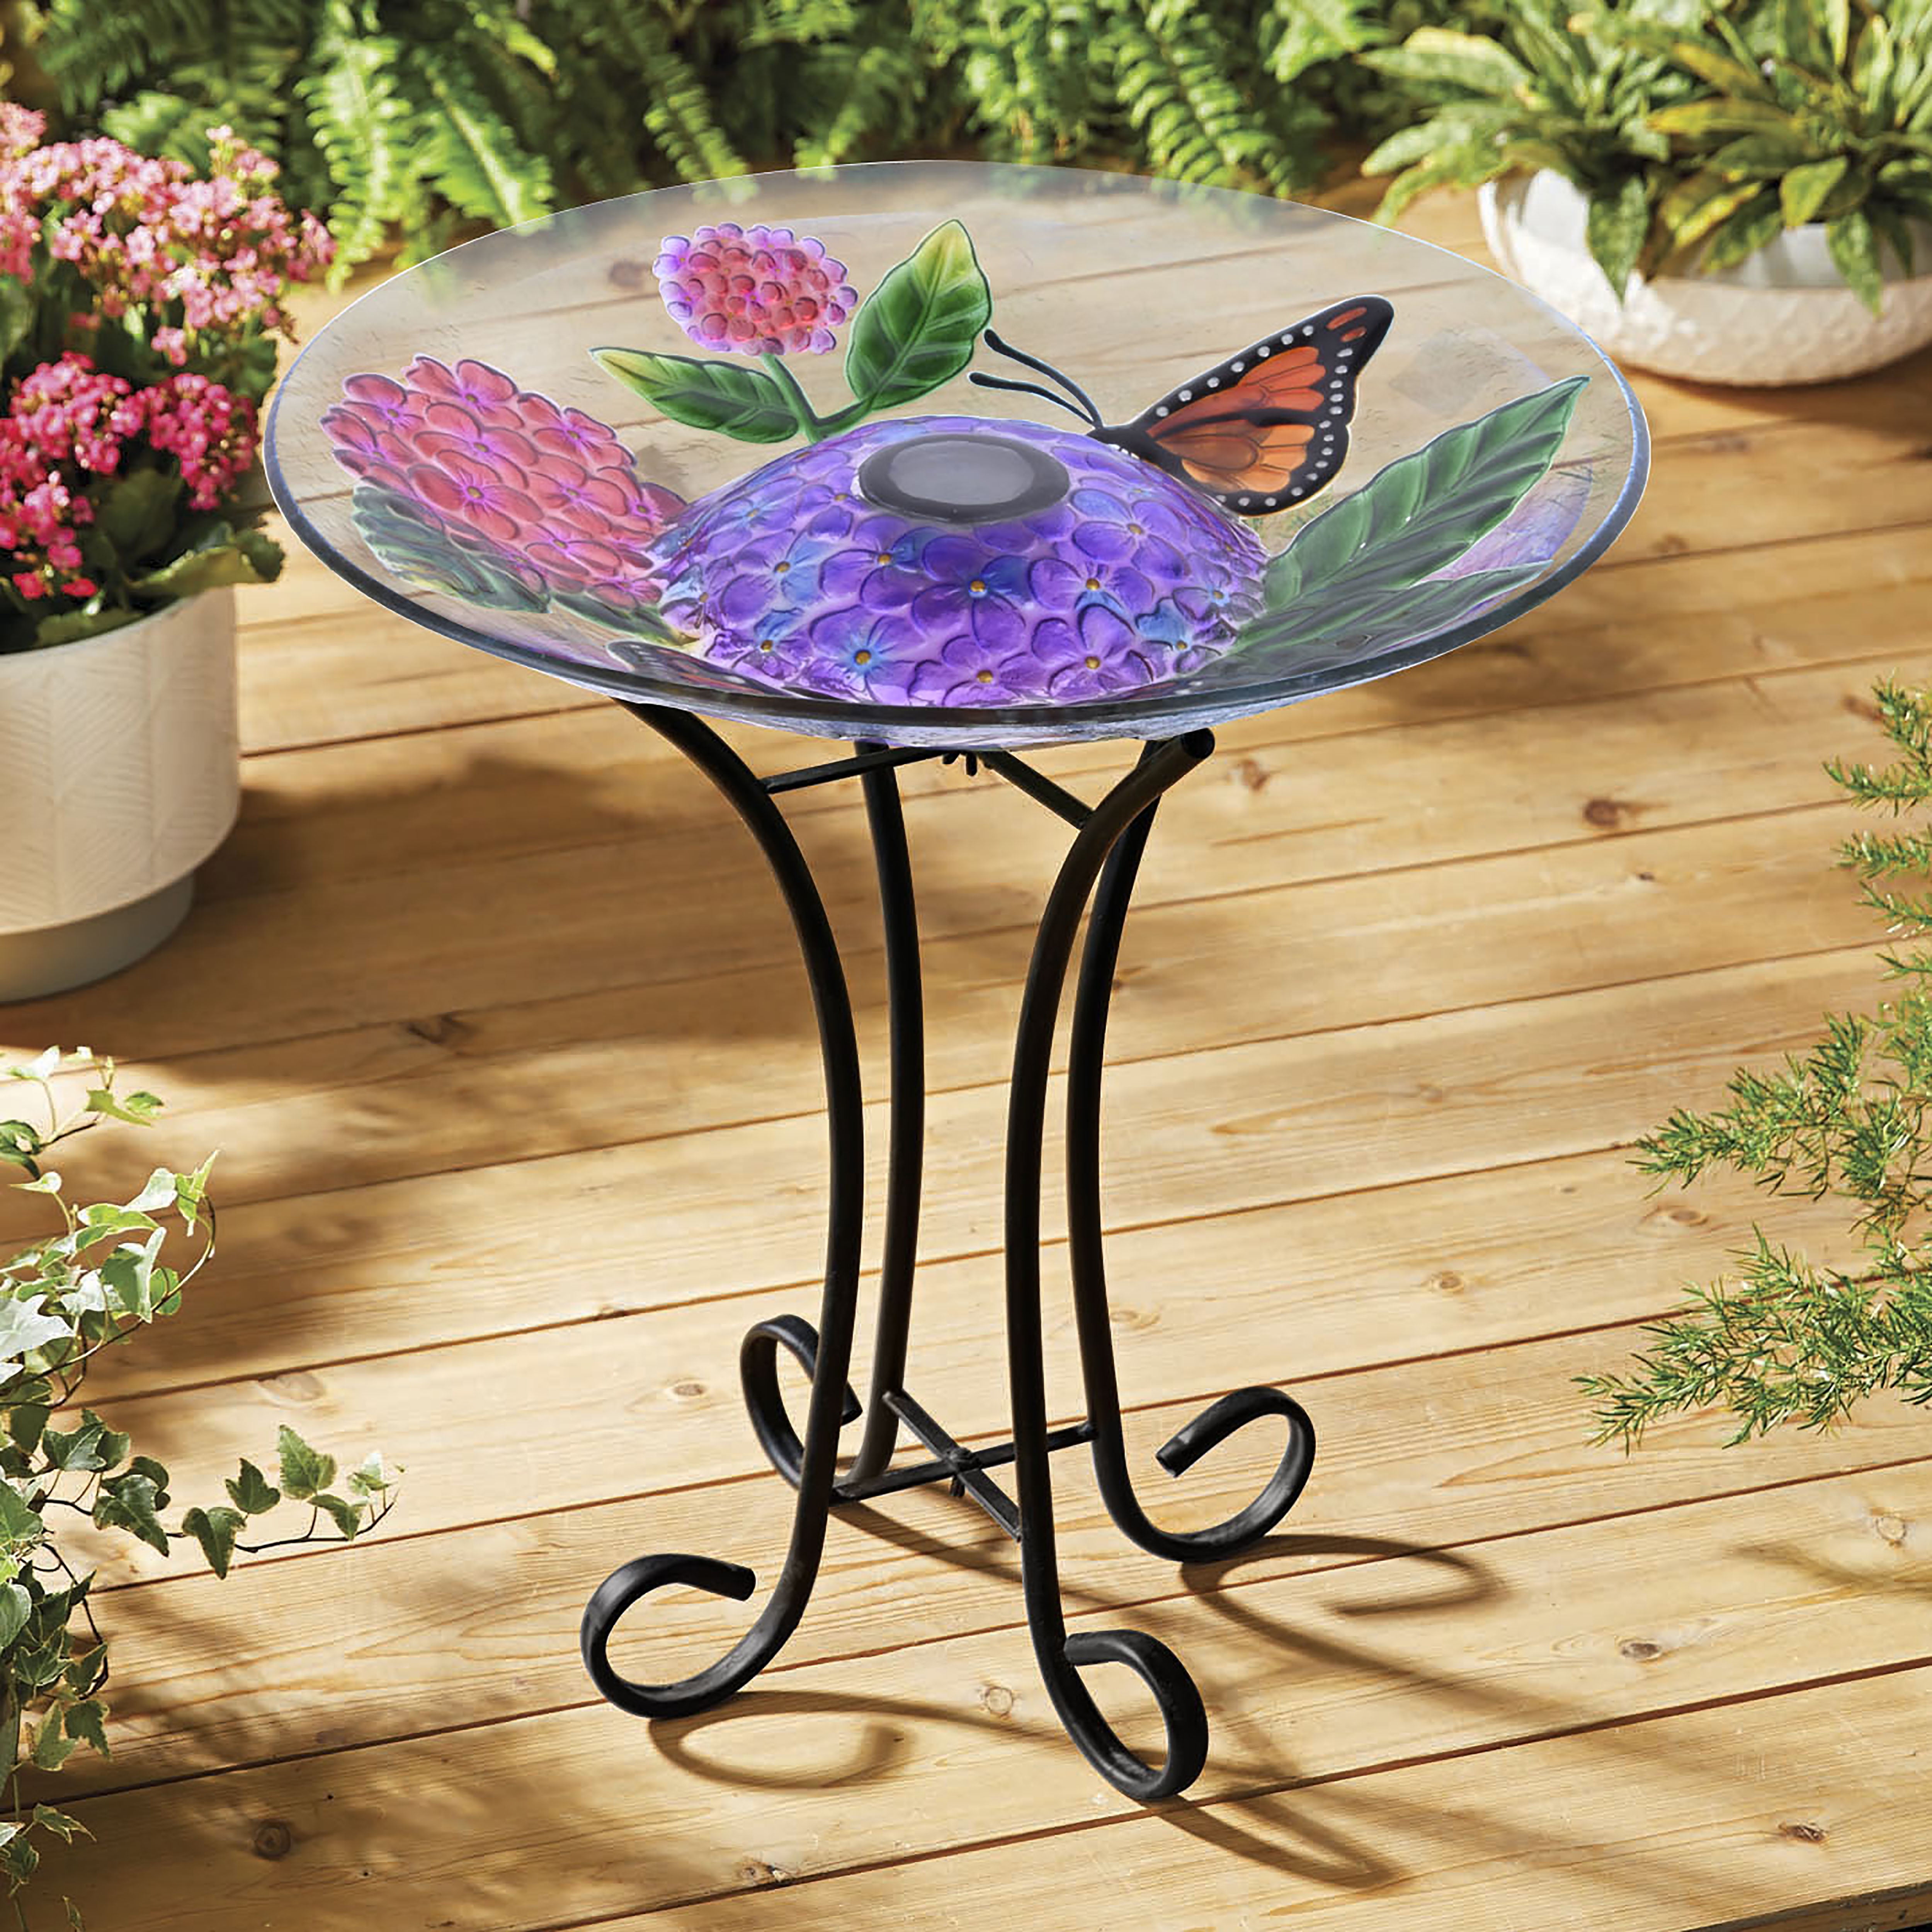 Peaktop Butterfly Fusion Glass Solar Bird Bath with Stand 